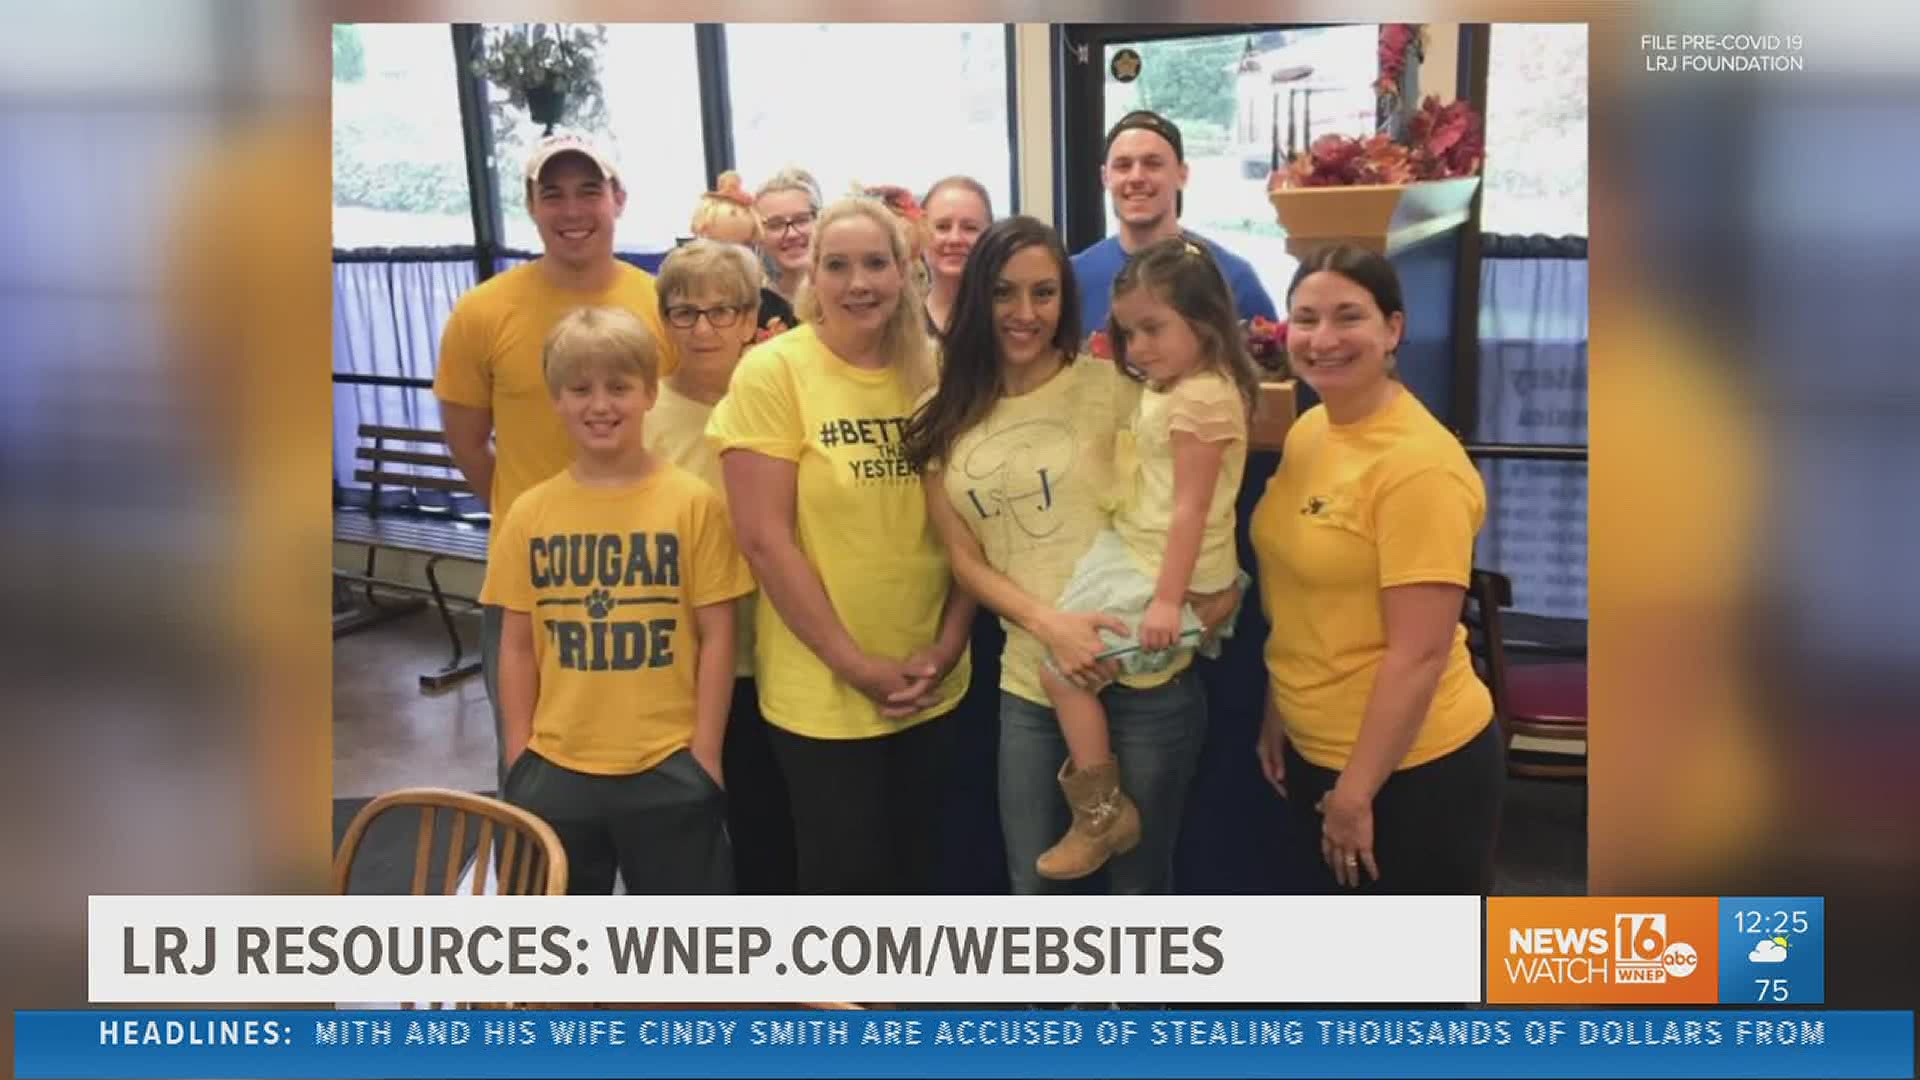 The "wear yellow" project didn't just help create a bright spot on a dreary Thursday. The campaign focused on awareness of World Suicide Prevention Day.